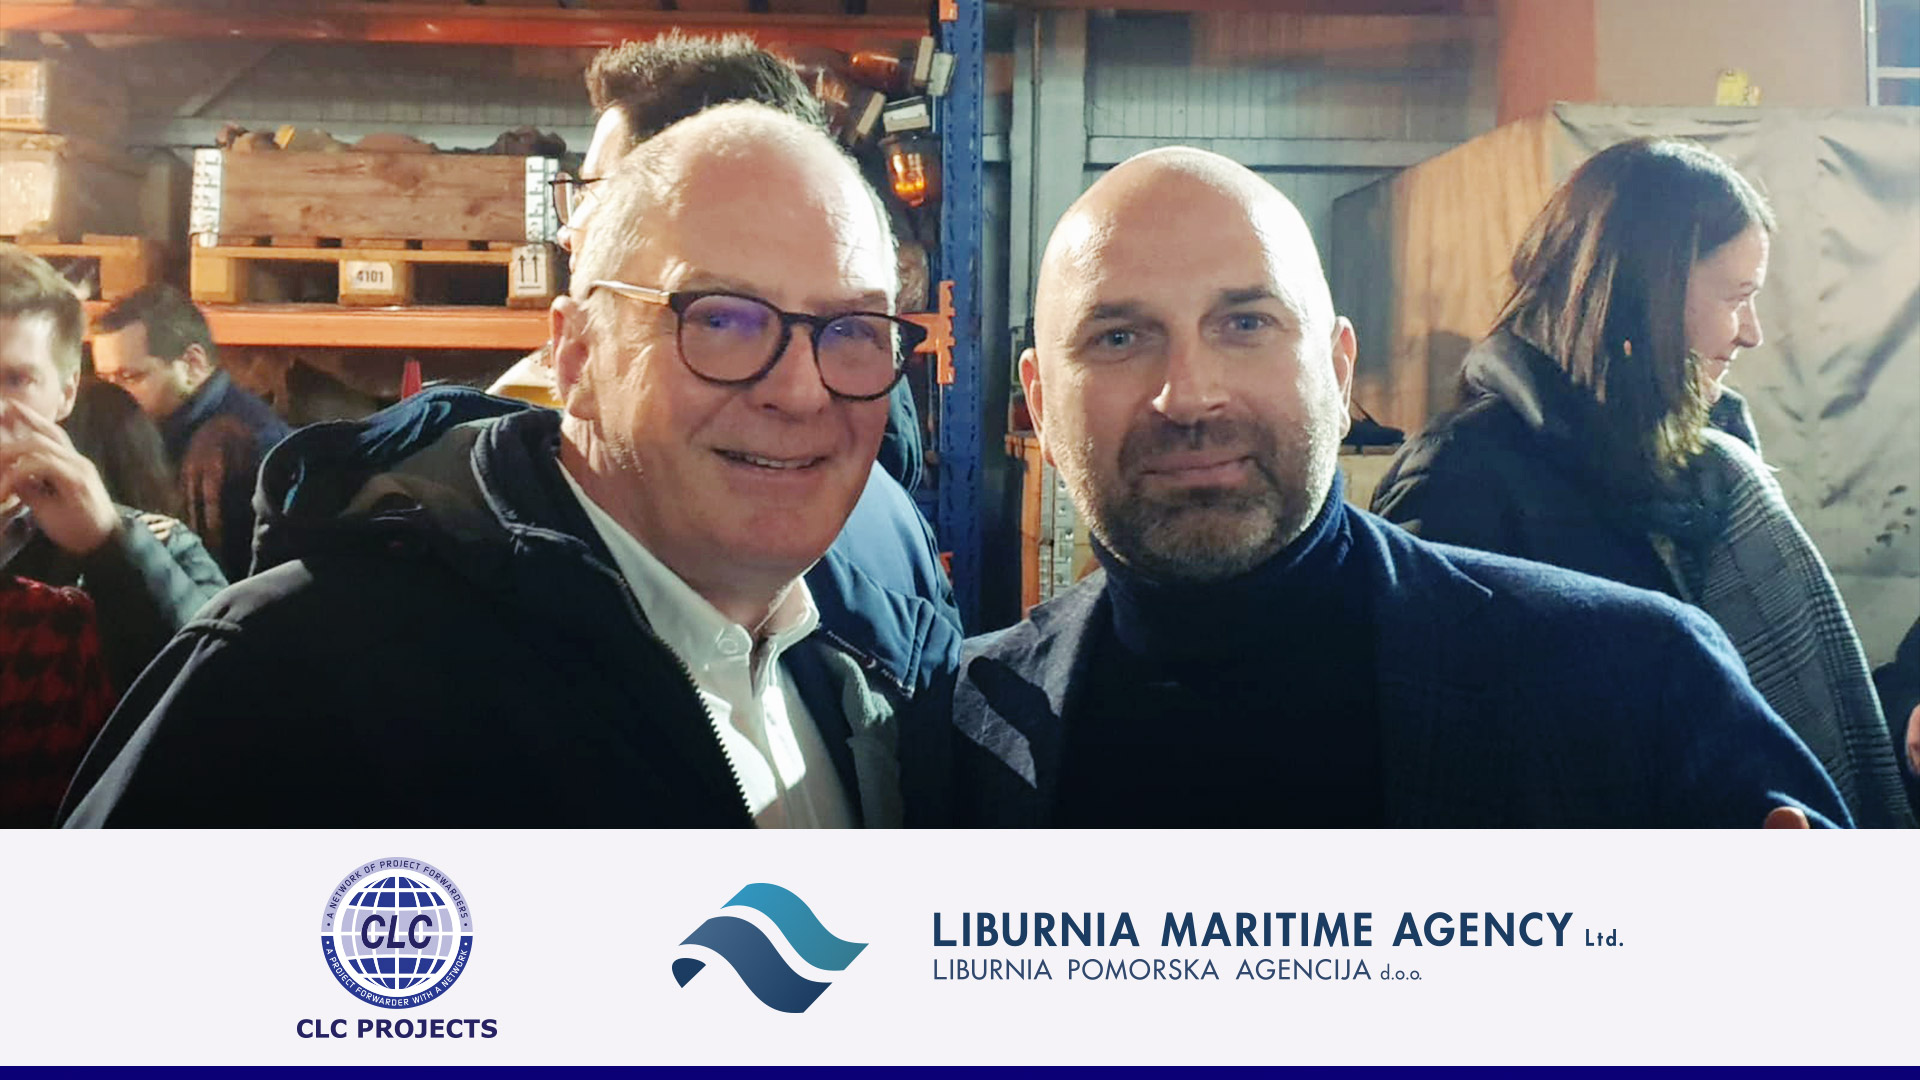 CLC Projects meeting with Liburnia Maritime at their Great Annual Event in Zagreb, Croatia